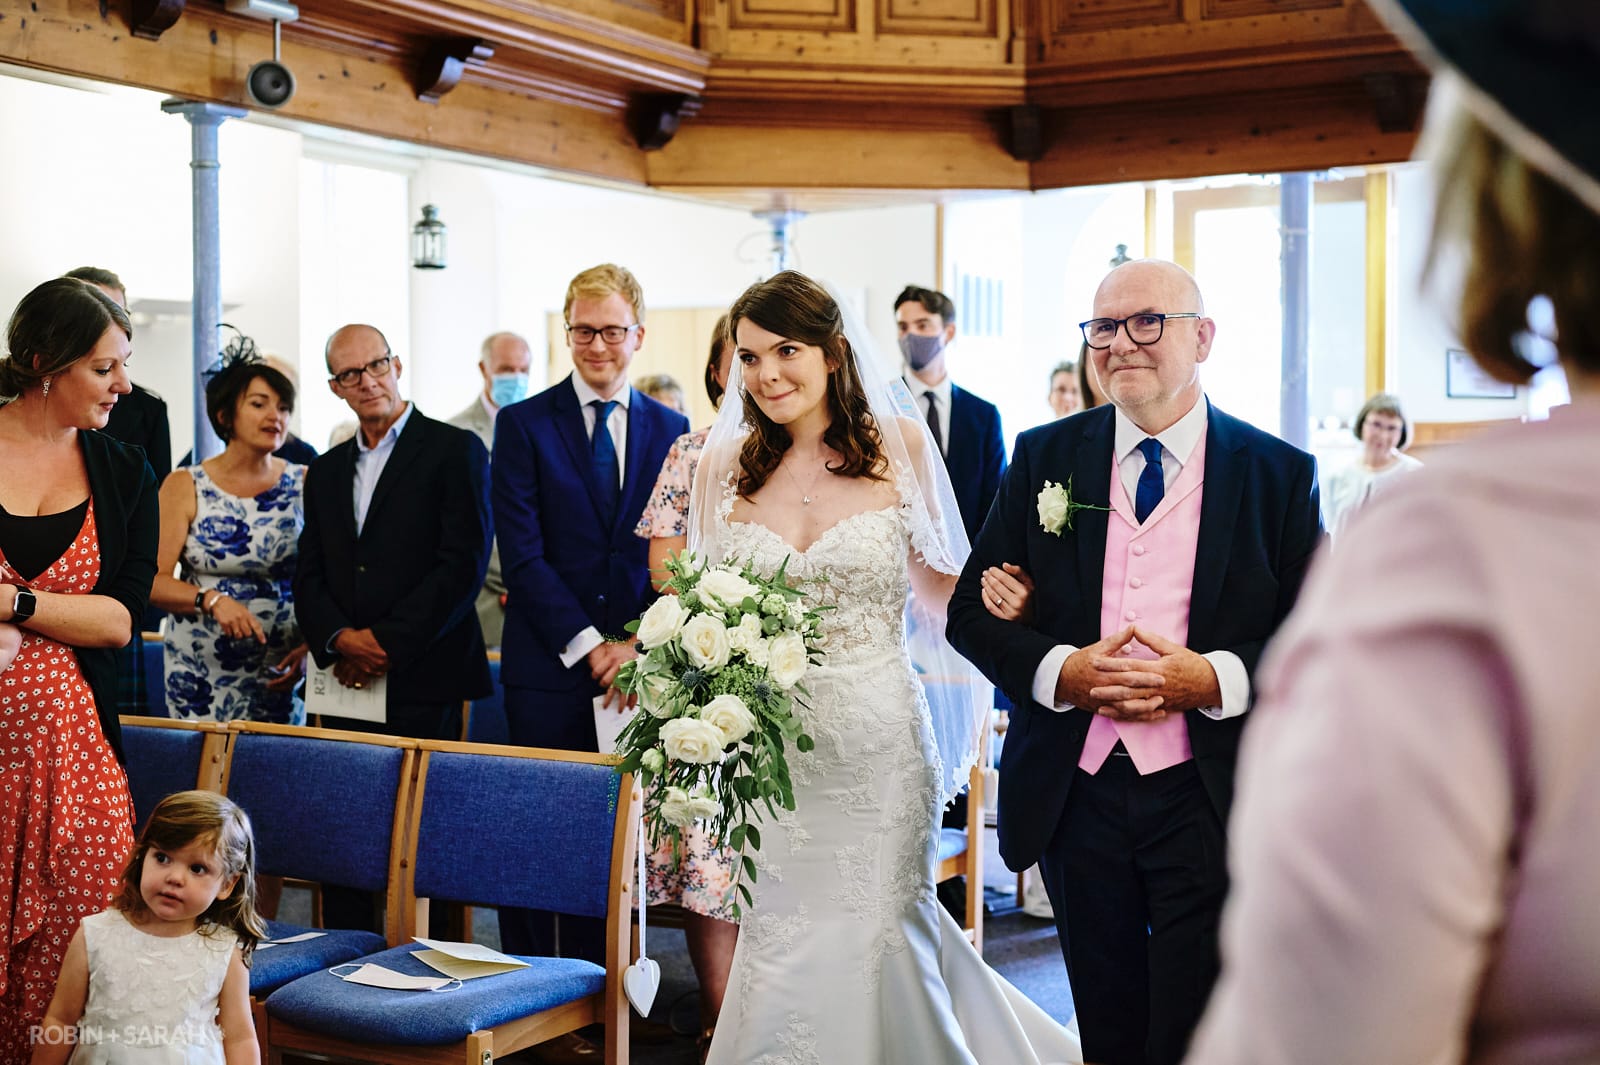 Bride and father walk up aisle at Long Buckby Baptist Church wedding